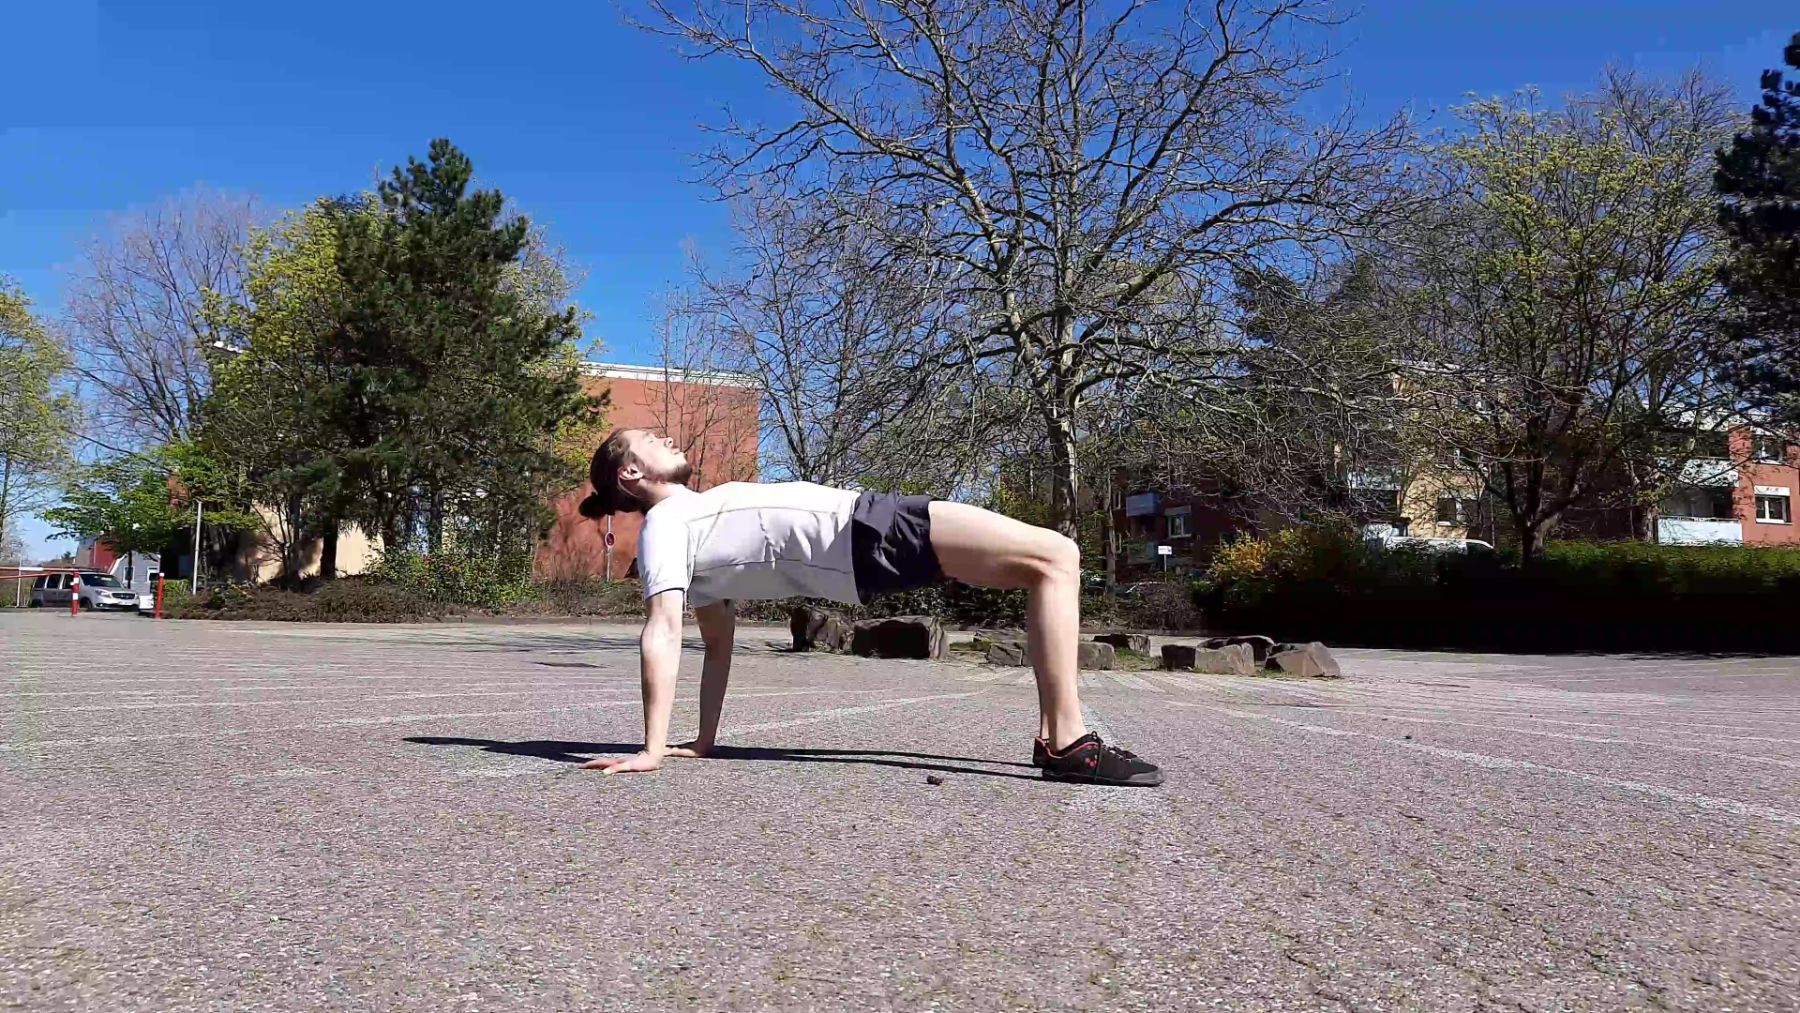 This image shows me performing a yoga table top pose.